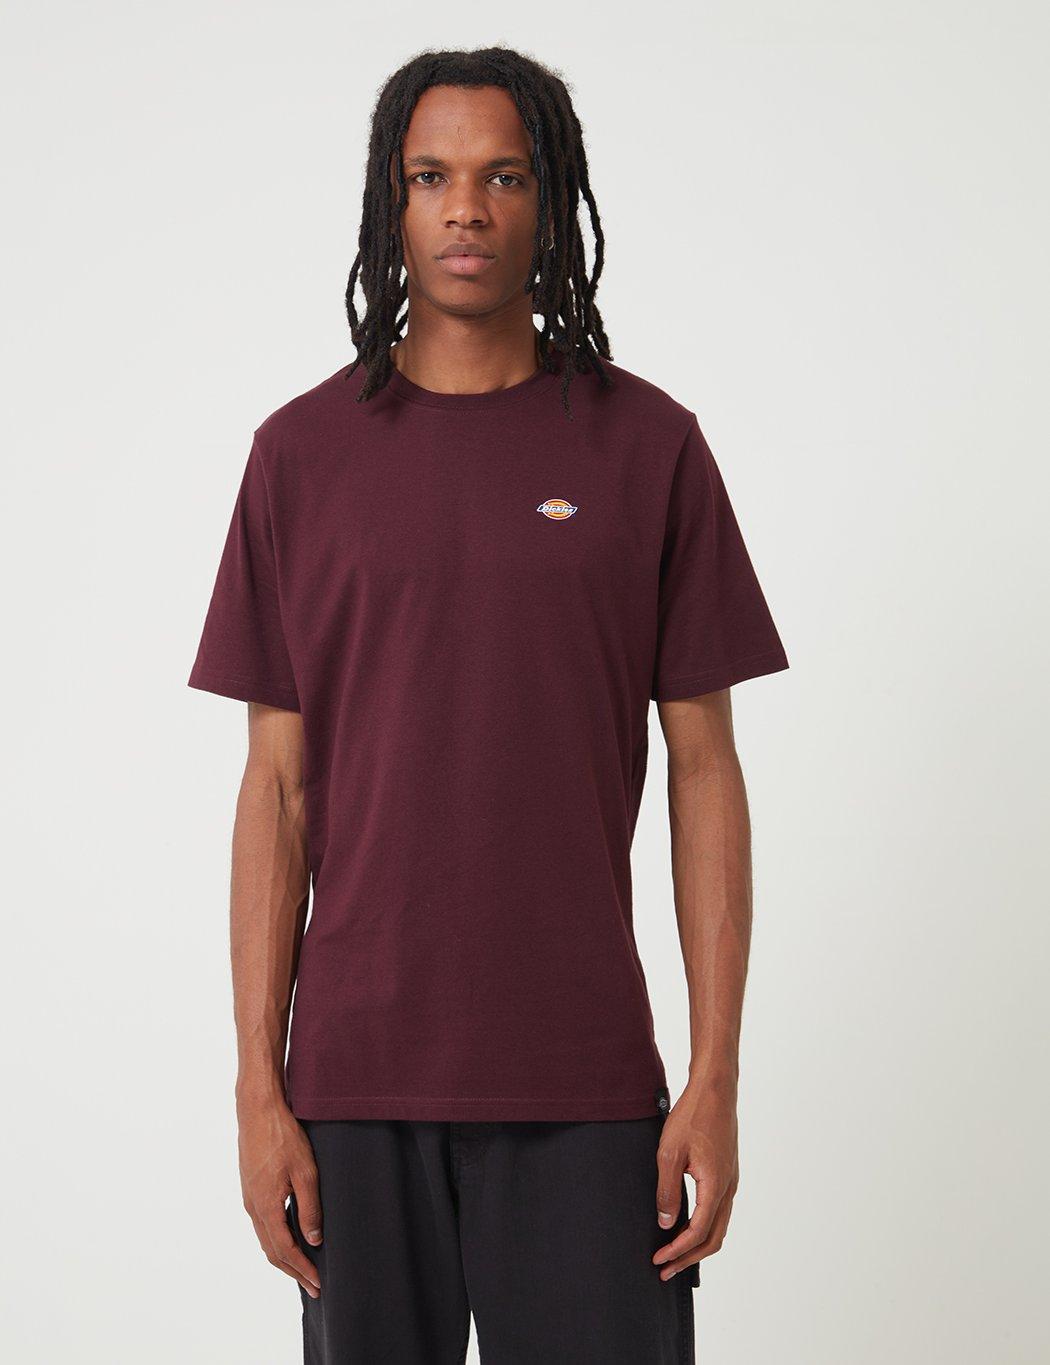 Dickies Cotton Stockdale T-shirt in Purple for Men - Lyst